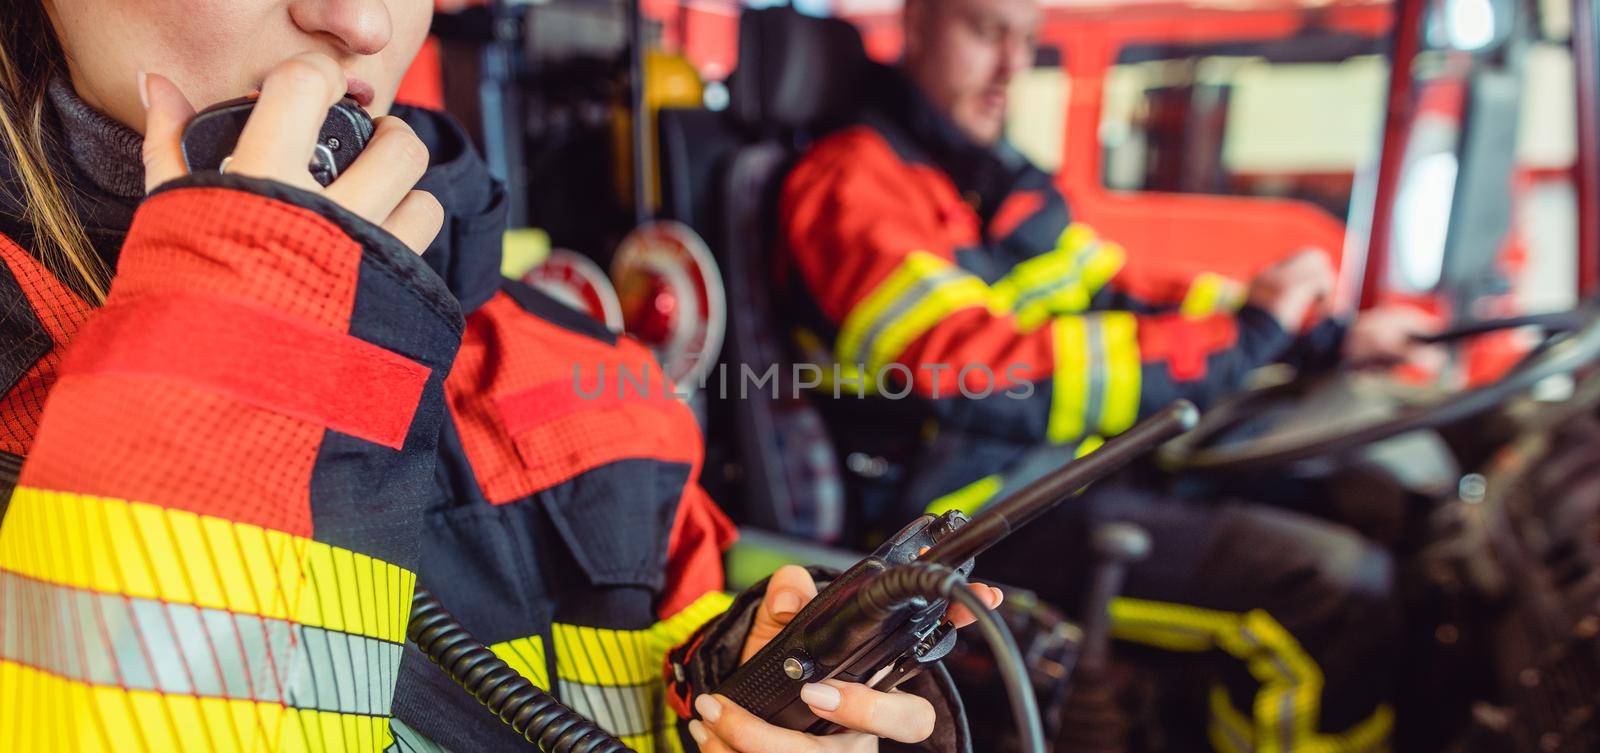 Fire fighter woman on duty using the radio in the fire truck